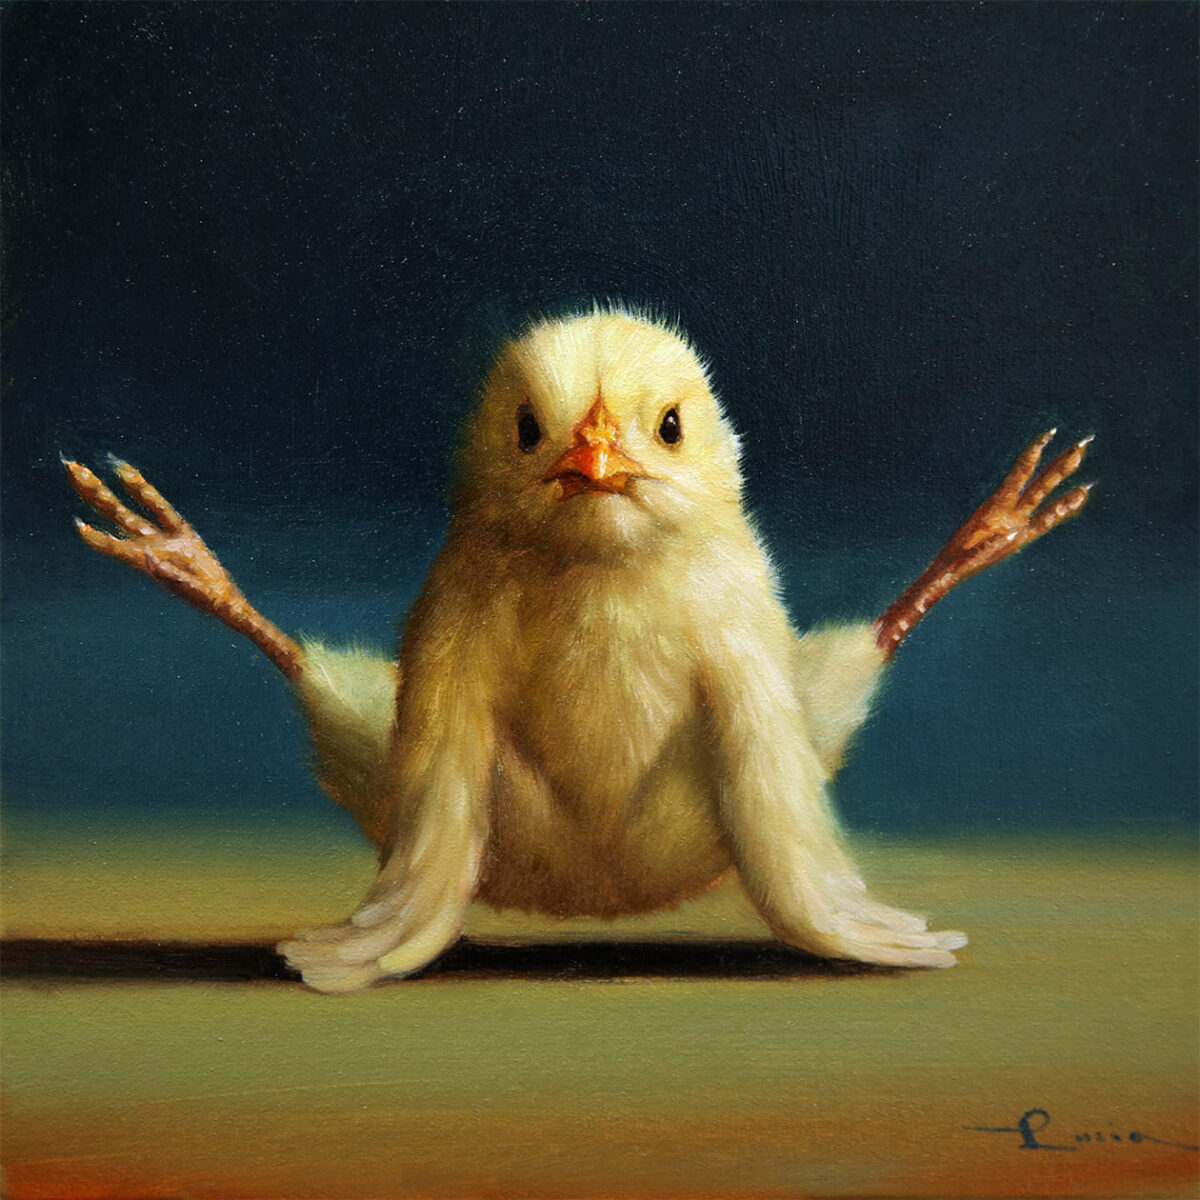 Lovely Paintings Of A Little Chicken Making Yoga Poses By Lucia Heffernan 1